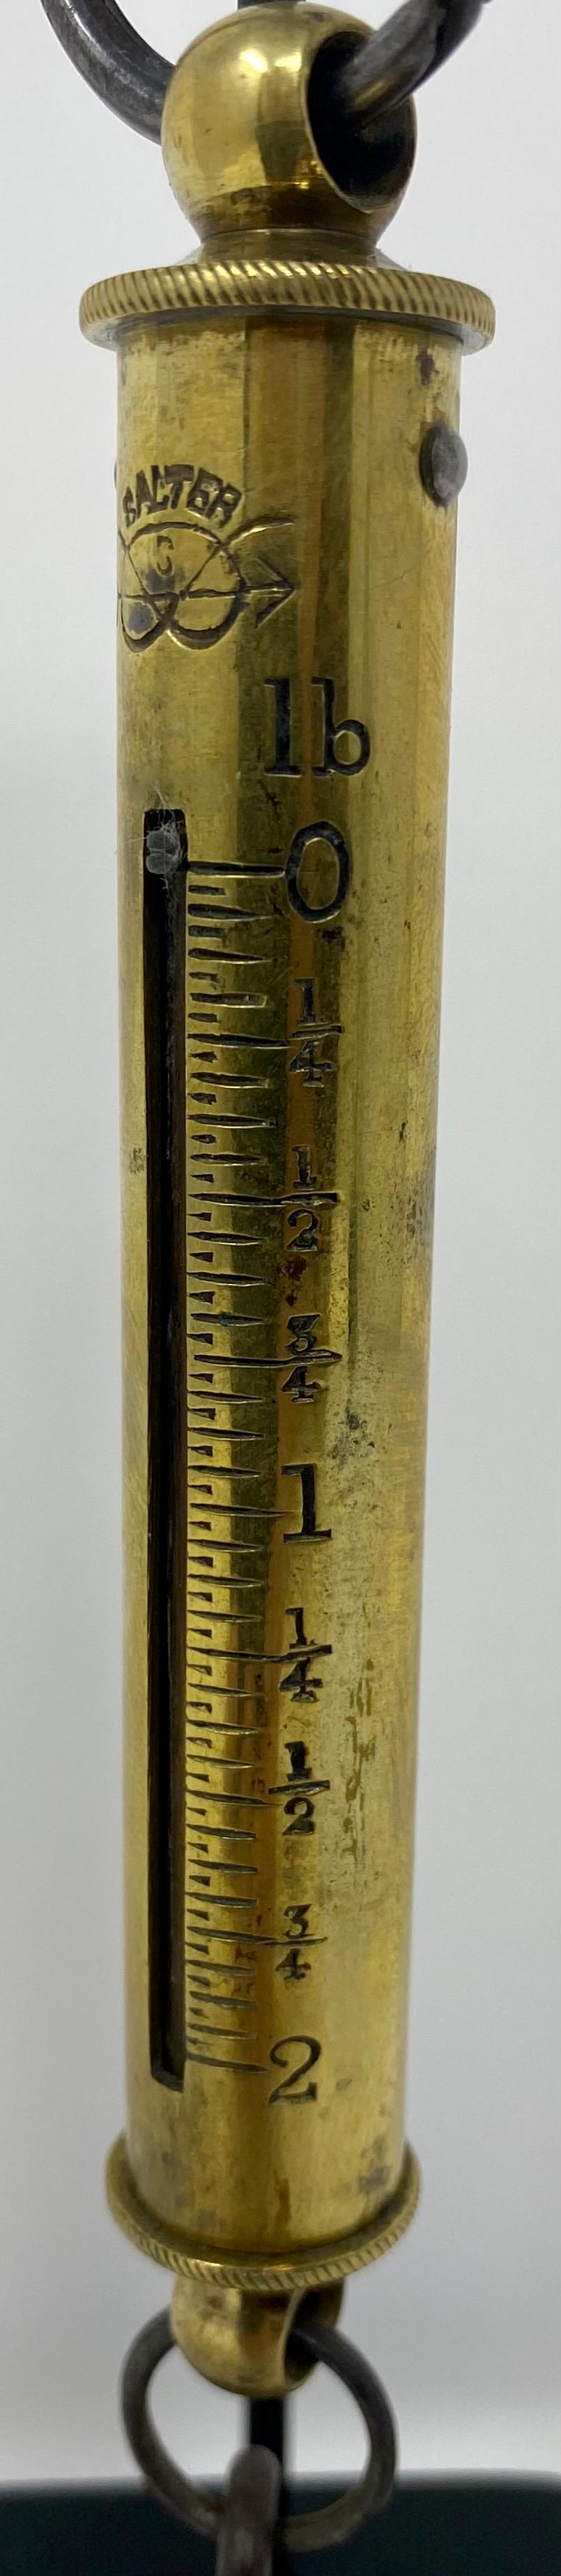 Antique English spring balance scale made by 